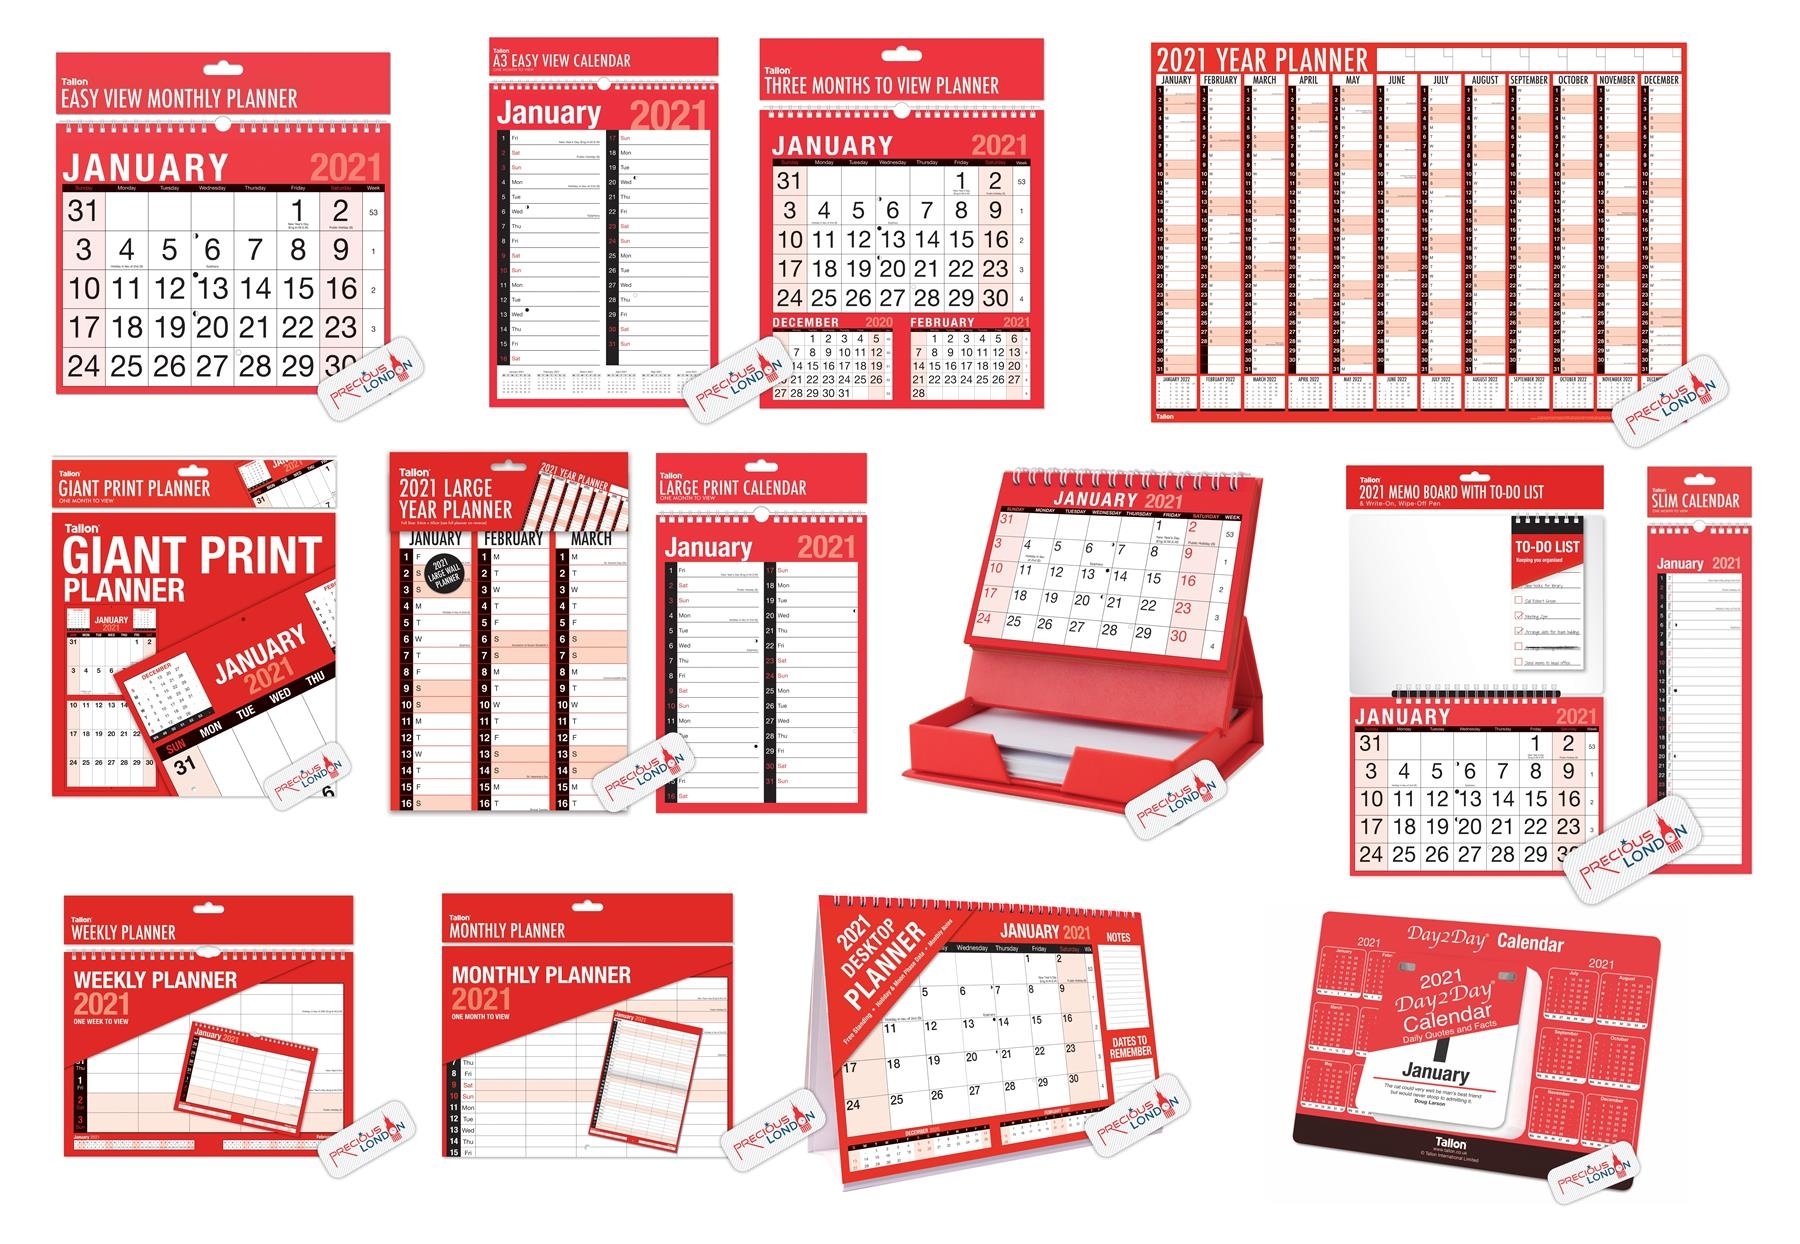 Details About 2021 Wall Calendar Large Month To View, Easy View Slim  Calendar Giant Planner